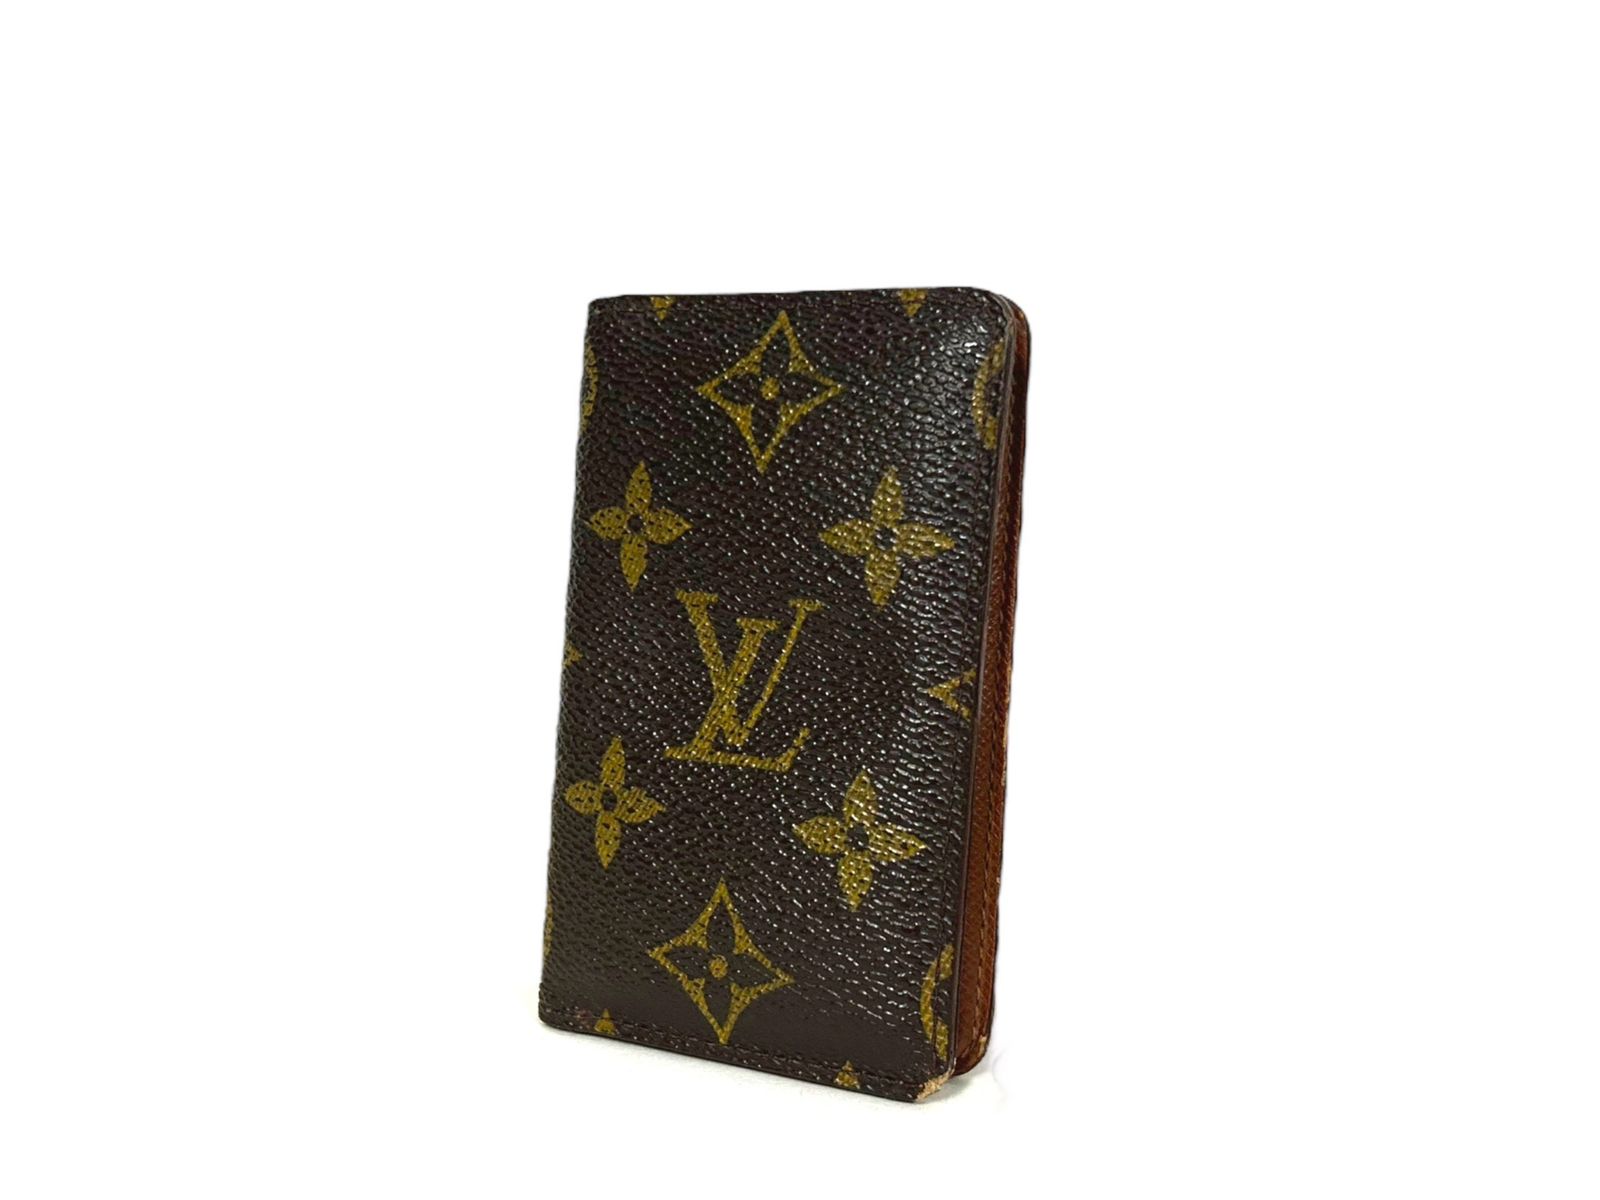 LOUIS VUITTON (ルイヴィトン) カードケース ポシェット カルト